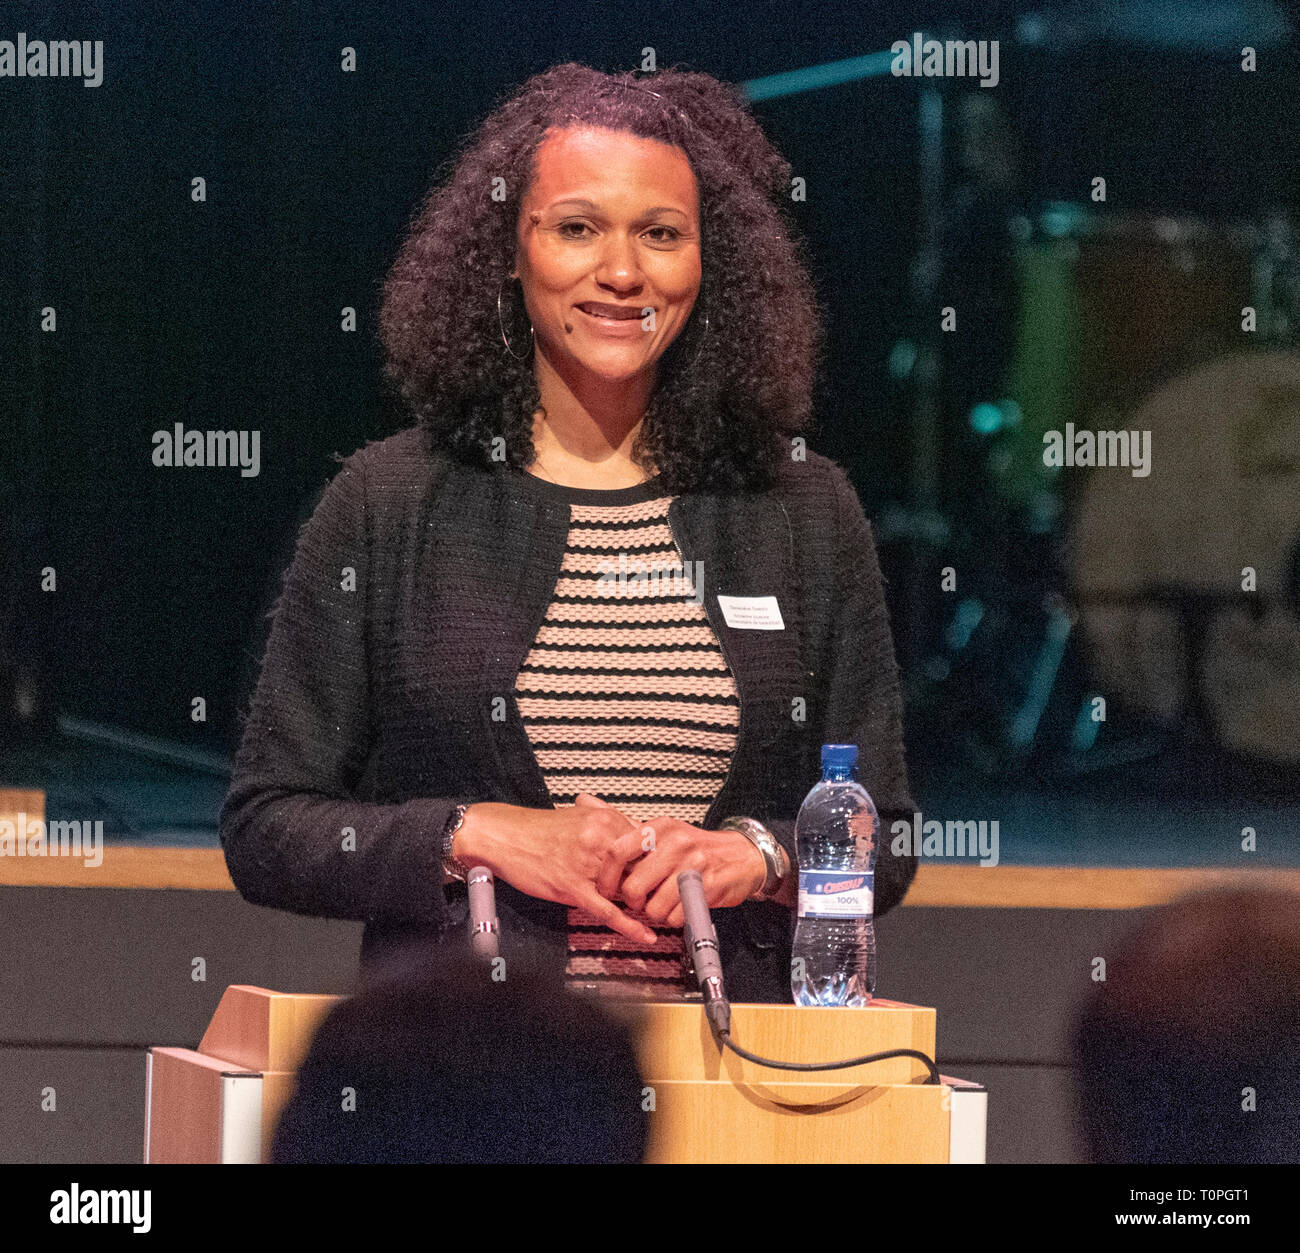 Lausanne, Switzerland. 21st March, 2019. Geneviève Swedor (Former University basketball player in the USA (UC Berkeley) who is testifying at the 13th day of anti-racism action that occurred at the BCV Concert Hall in Lausanne, Switzerland on the 21st March, 2019. Credit: Eric Dubost/Alamy Live News Stock Photo